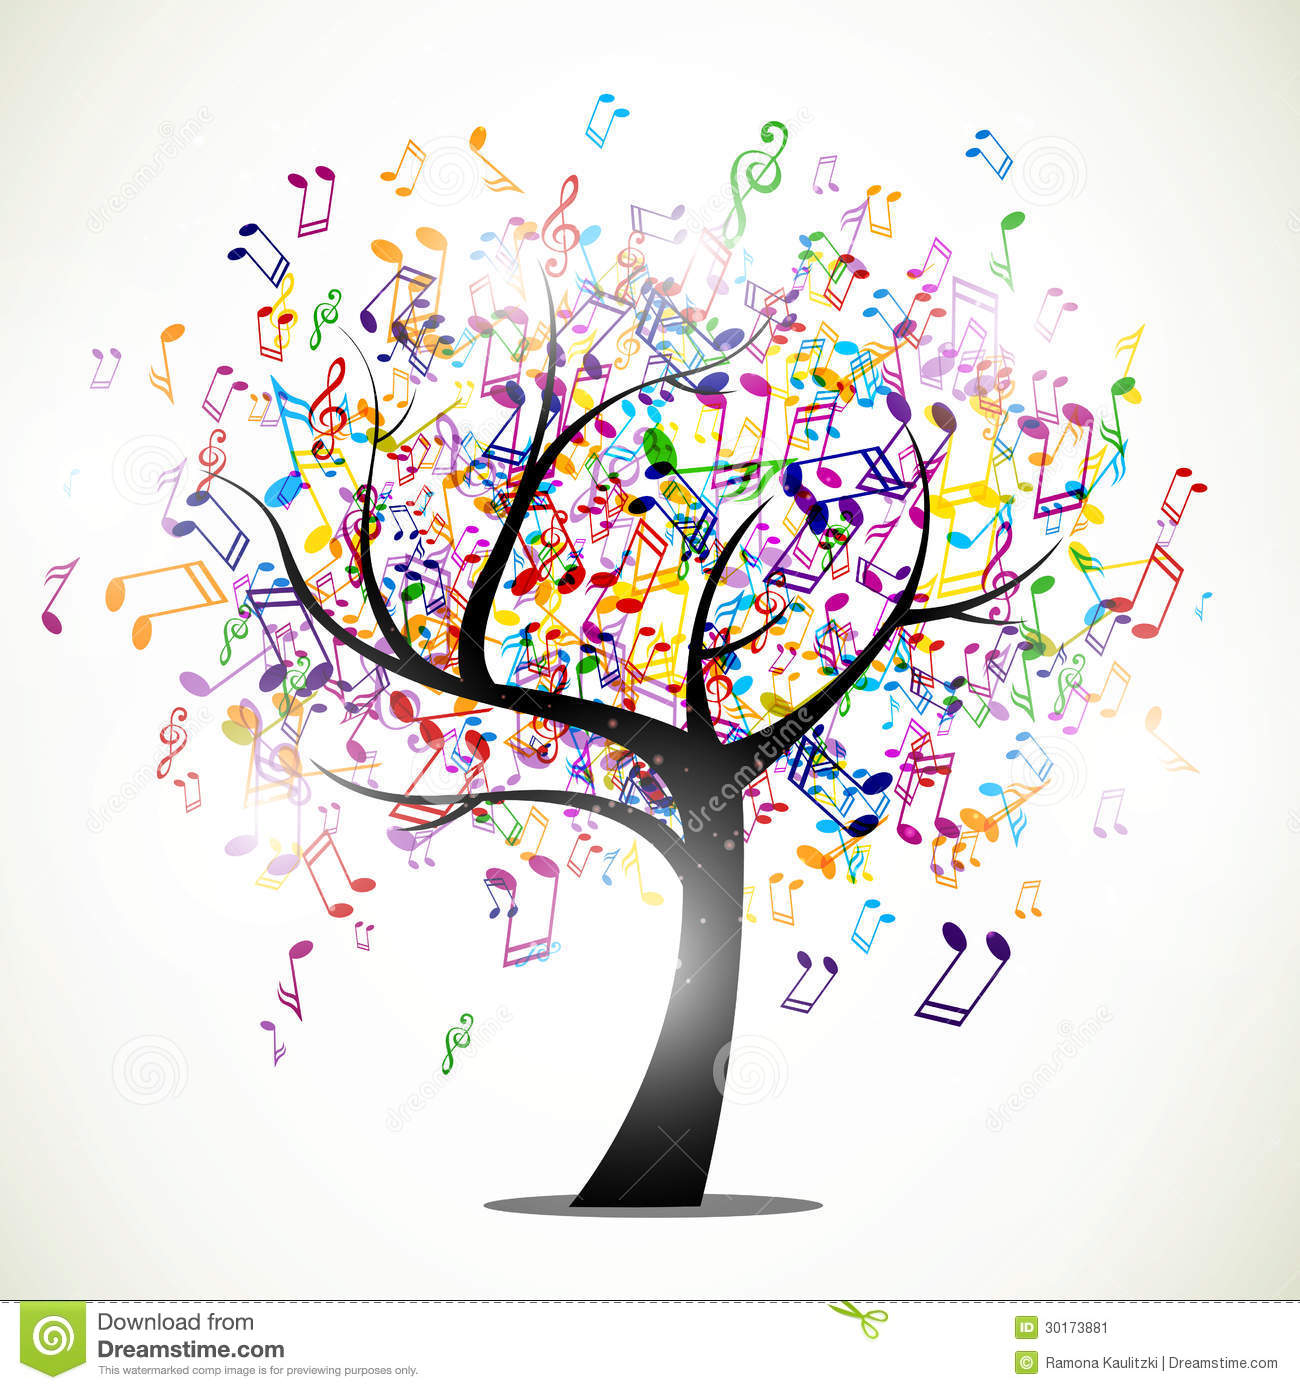 Abstract Music Tree Stock Image   Image  30173881